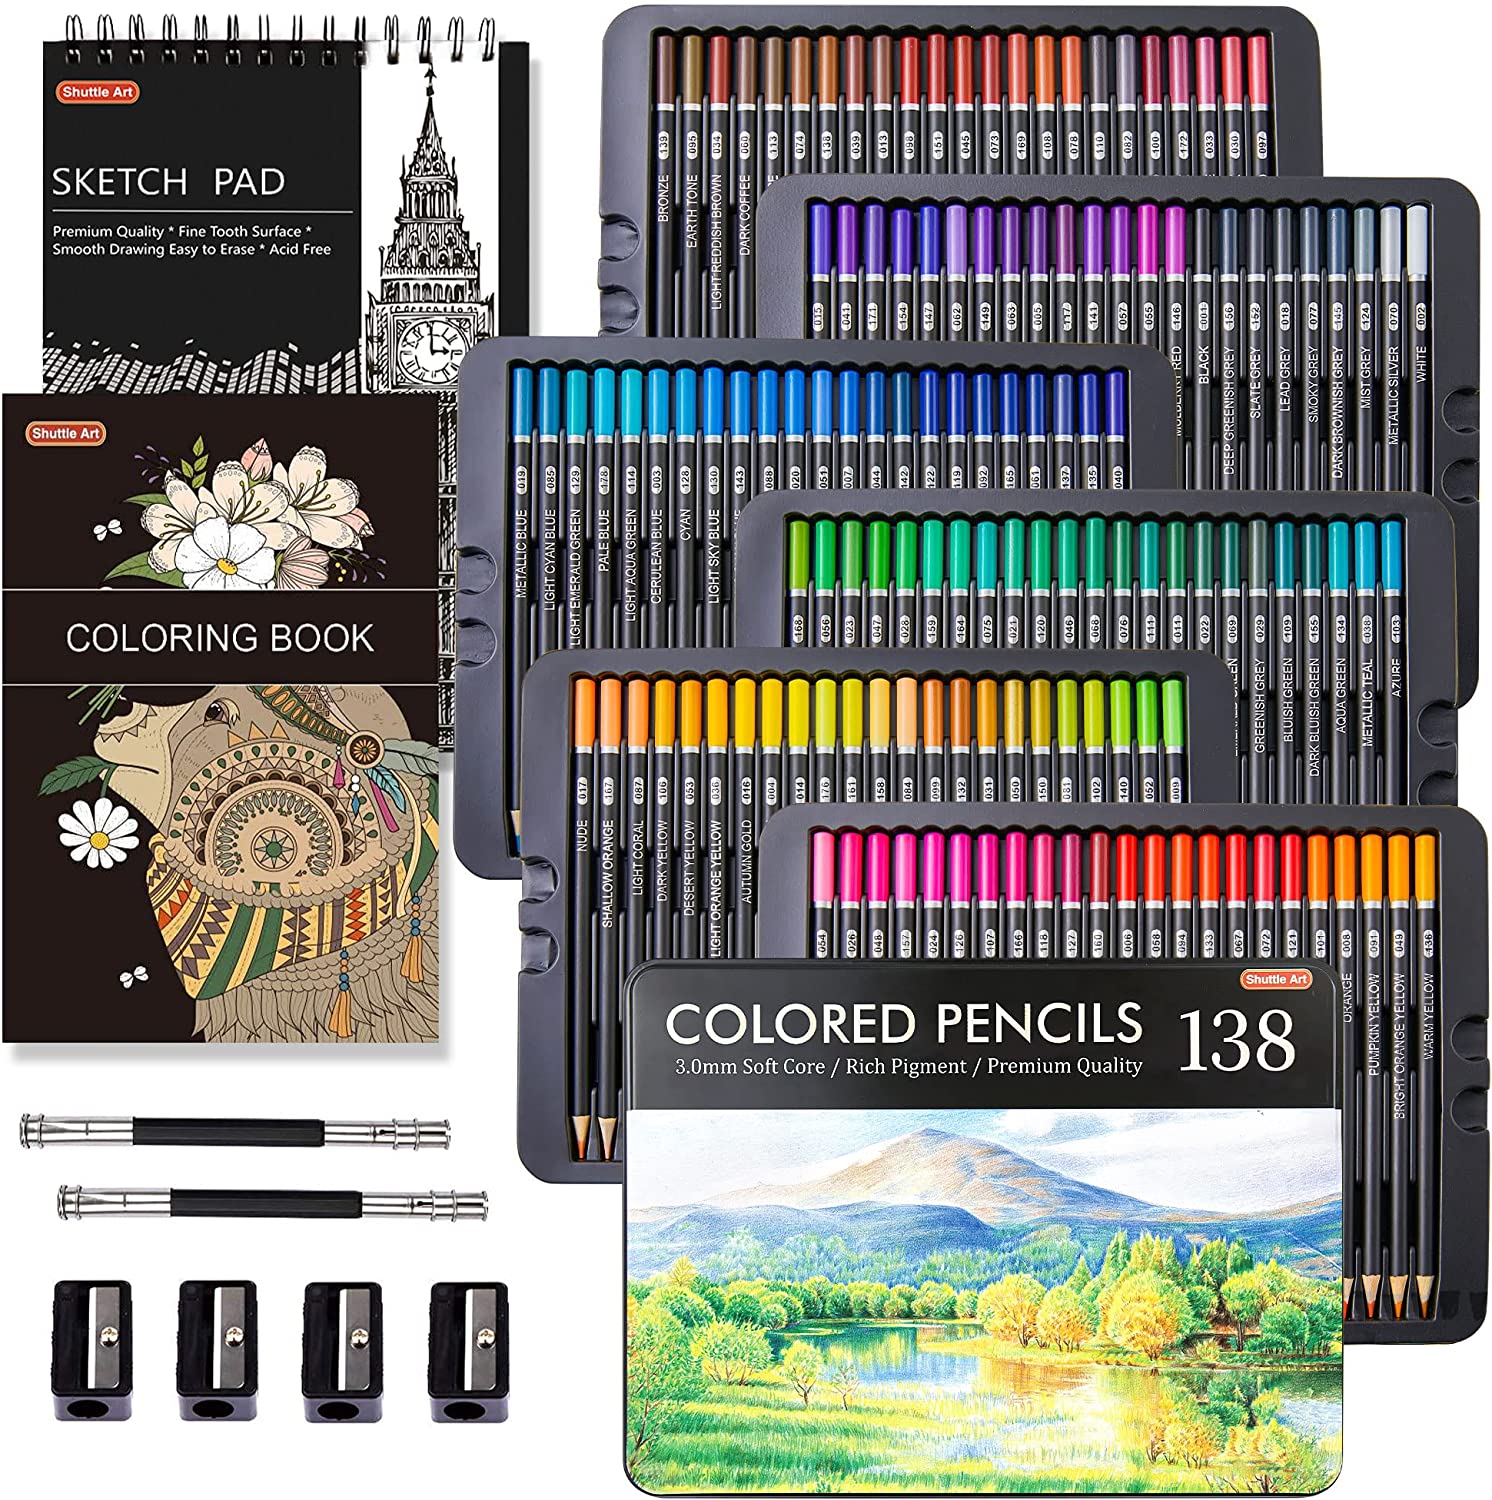 Pencils　Professional　Art　138　Coloring　Book,1　Colored　for　Set　Shuttle　with　Sketch　Soft　Core　Colors　Pencils,　Extender,　Pad,　Adults　Sharpener,　Coloring　Artists　Kids　Coloring　Pencil